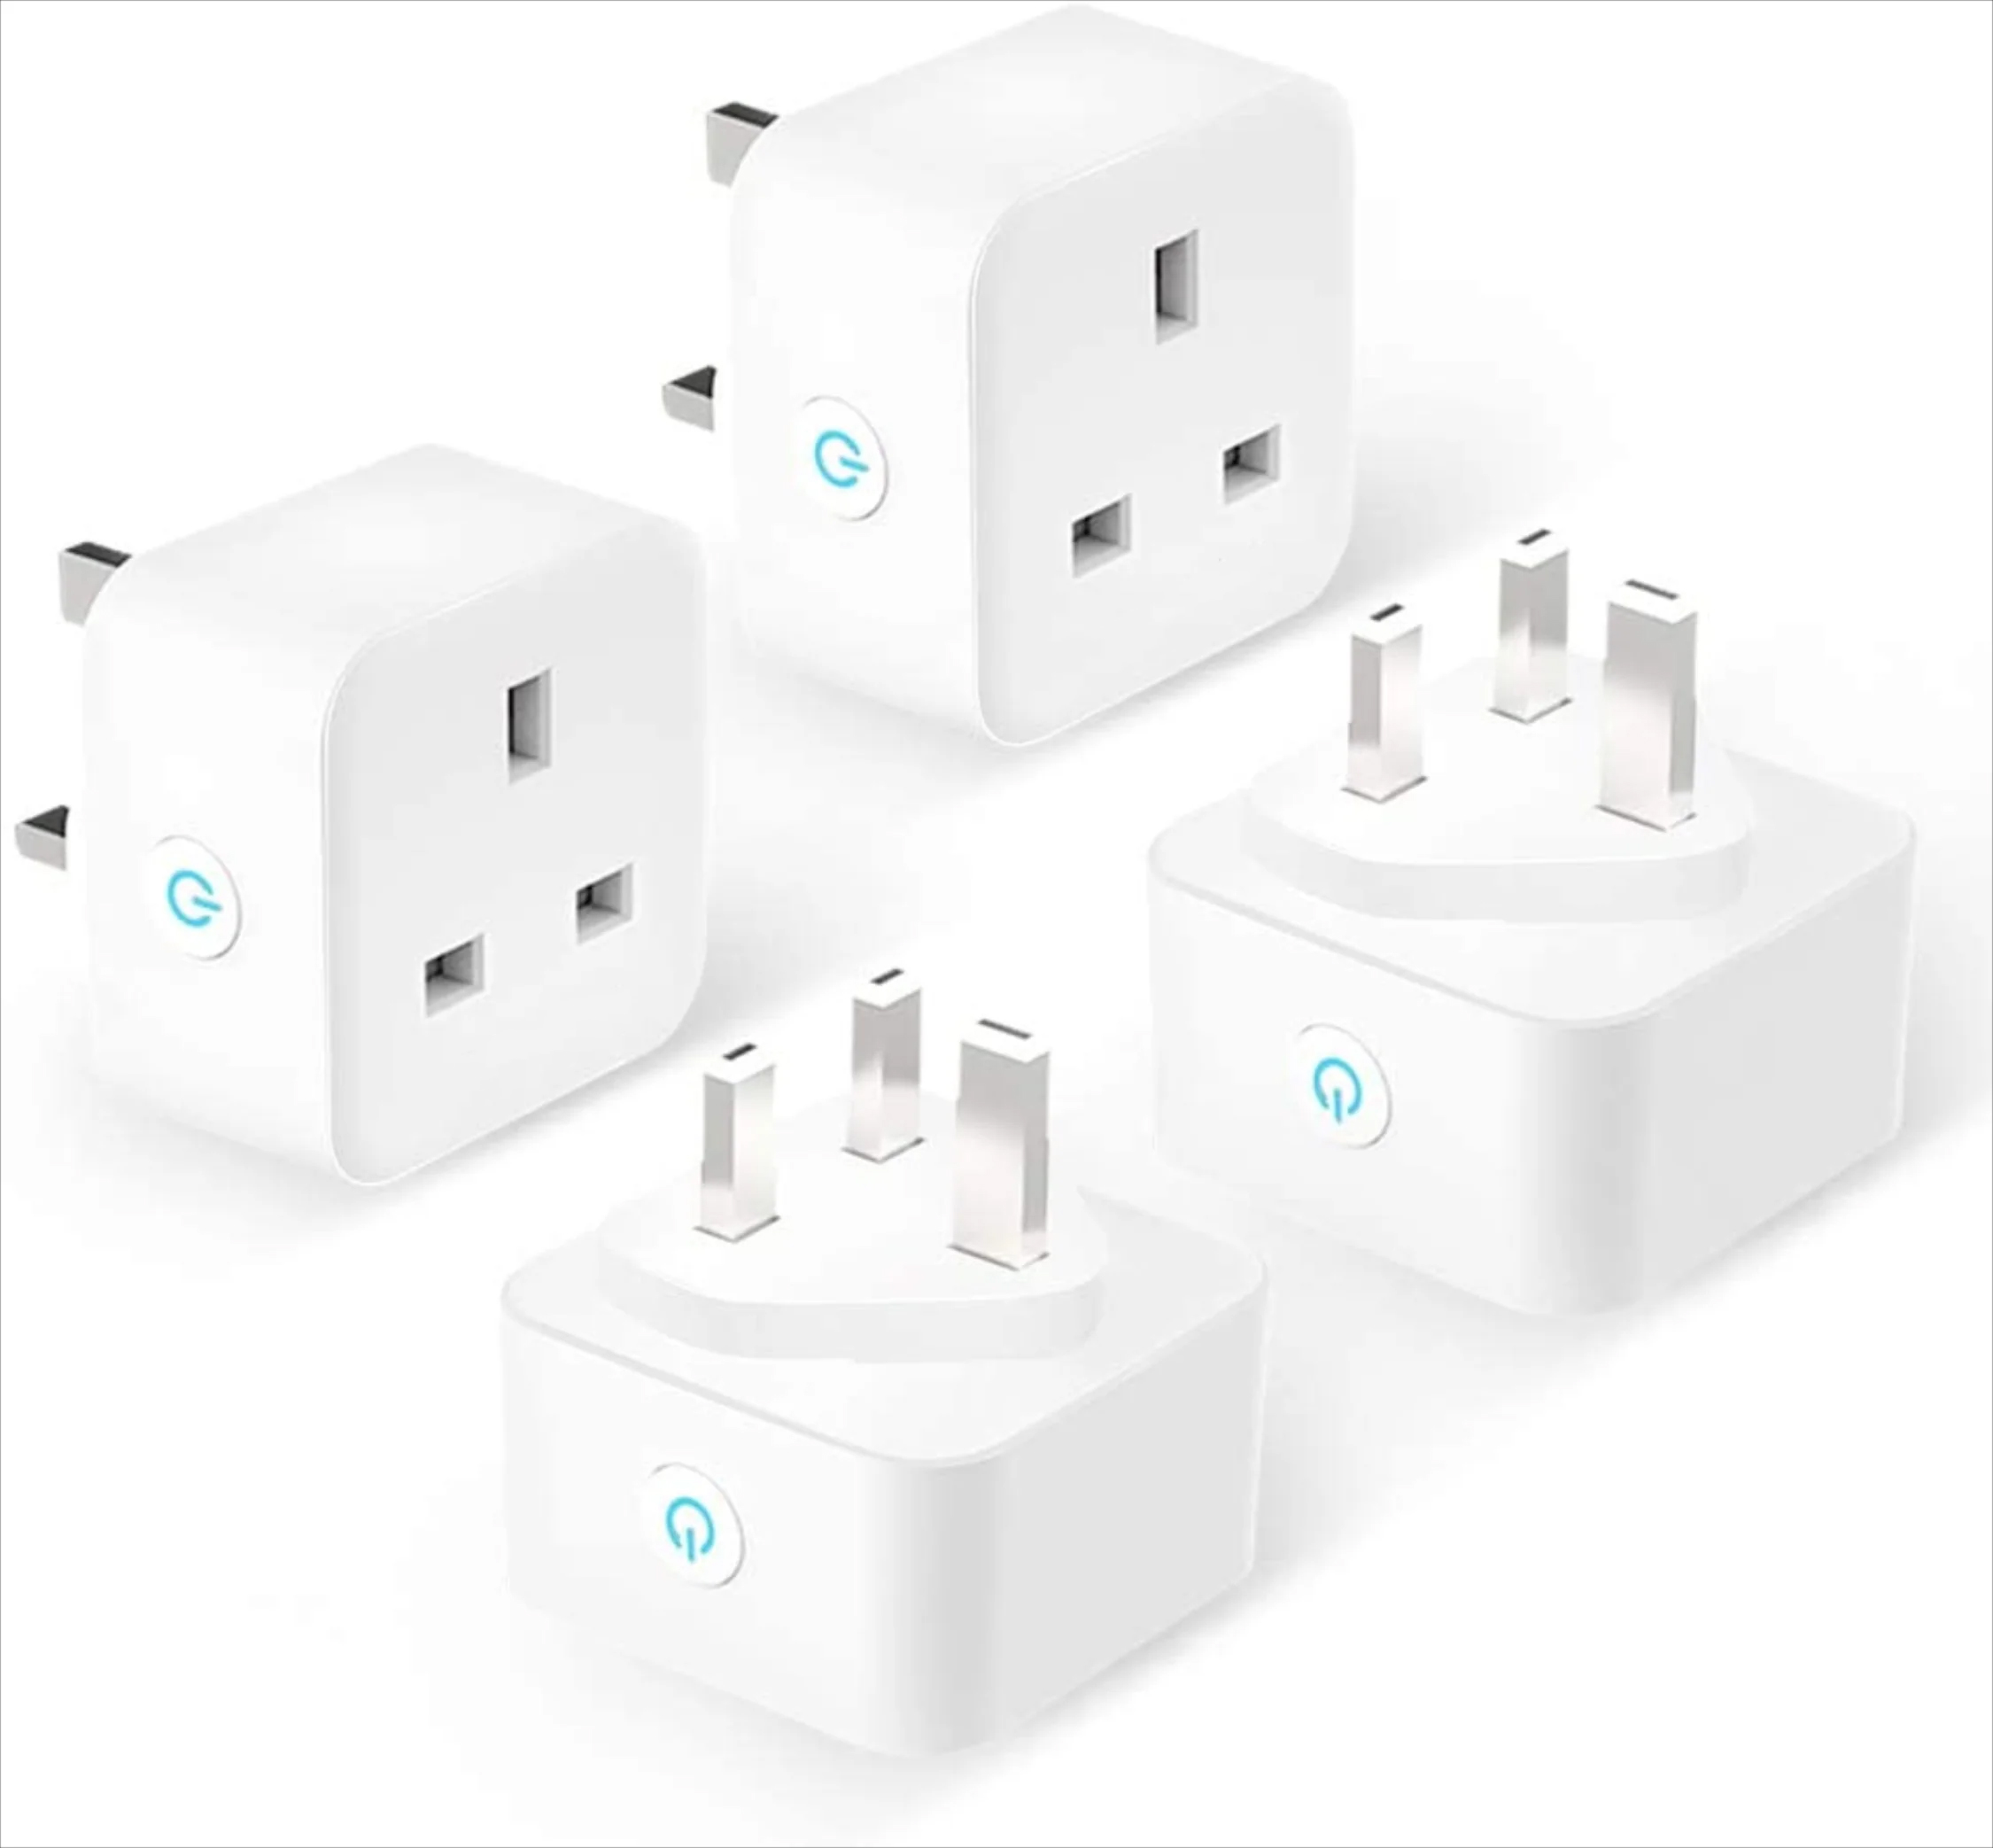 Teckin SP23 Smart Plug (New and old versions are shipped randomly)